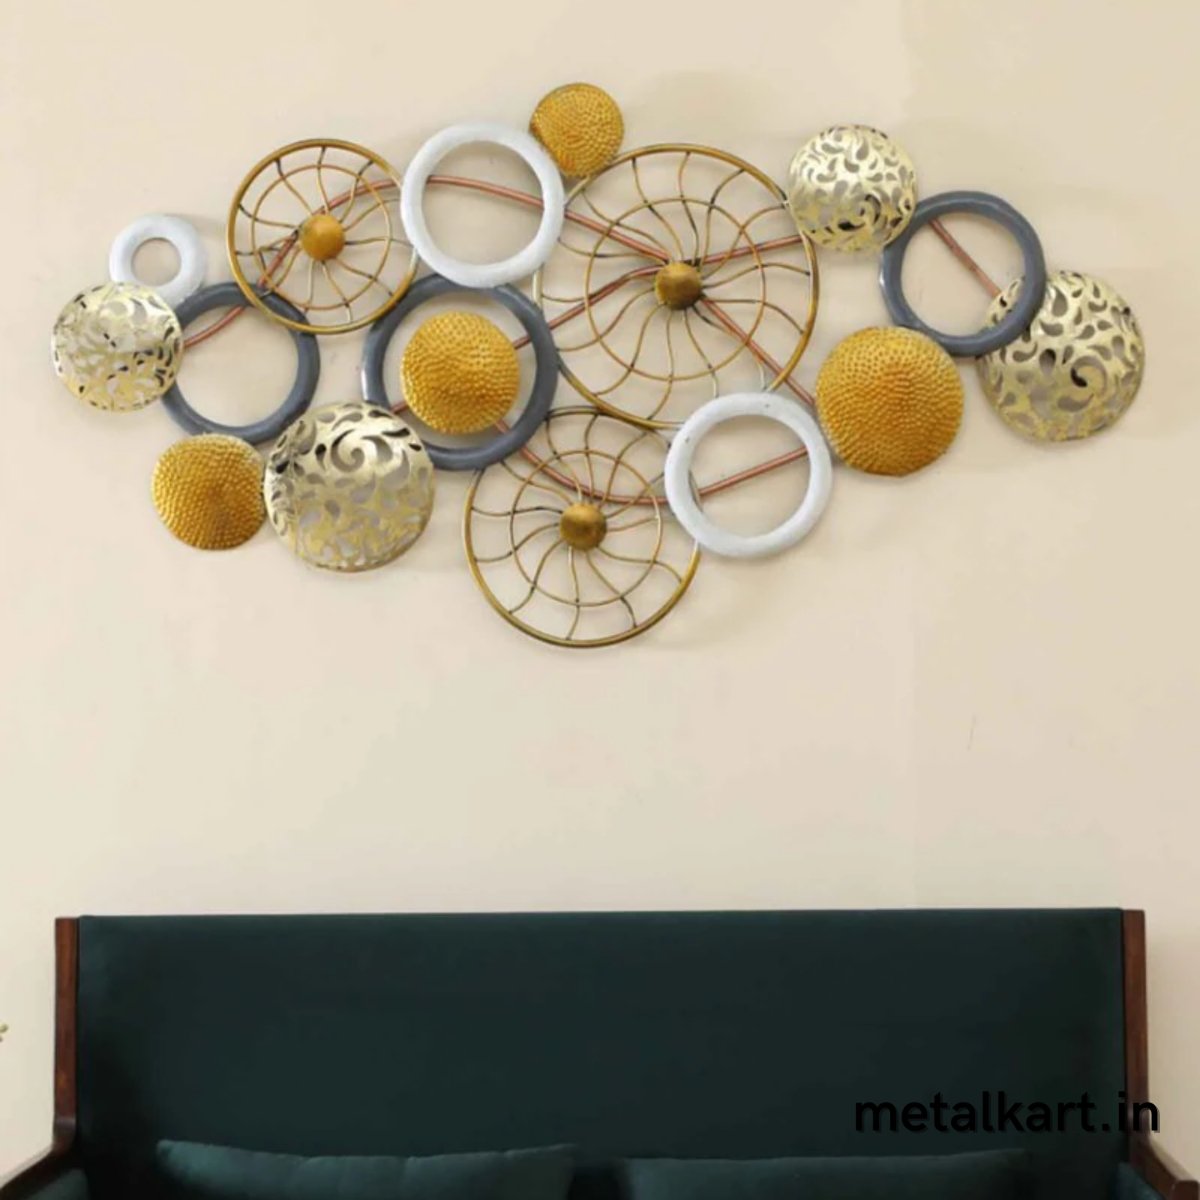 Metallic Combination of Wheels and Plates (52 x 22 Inches)